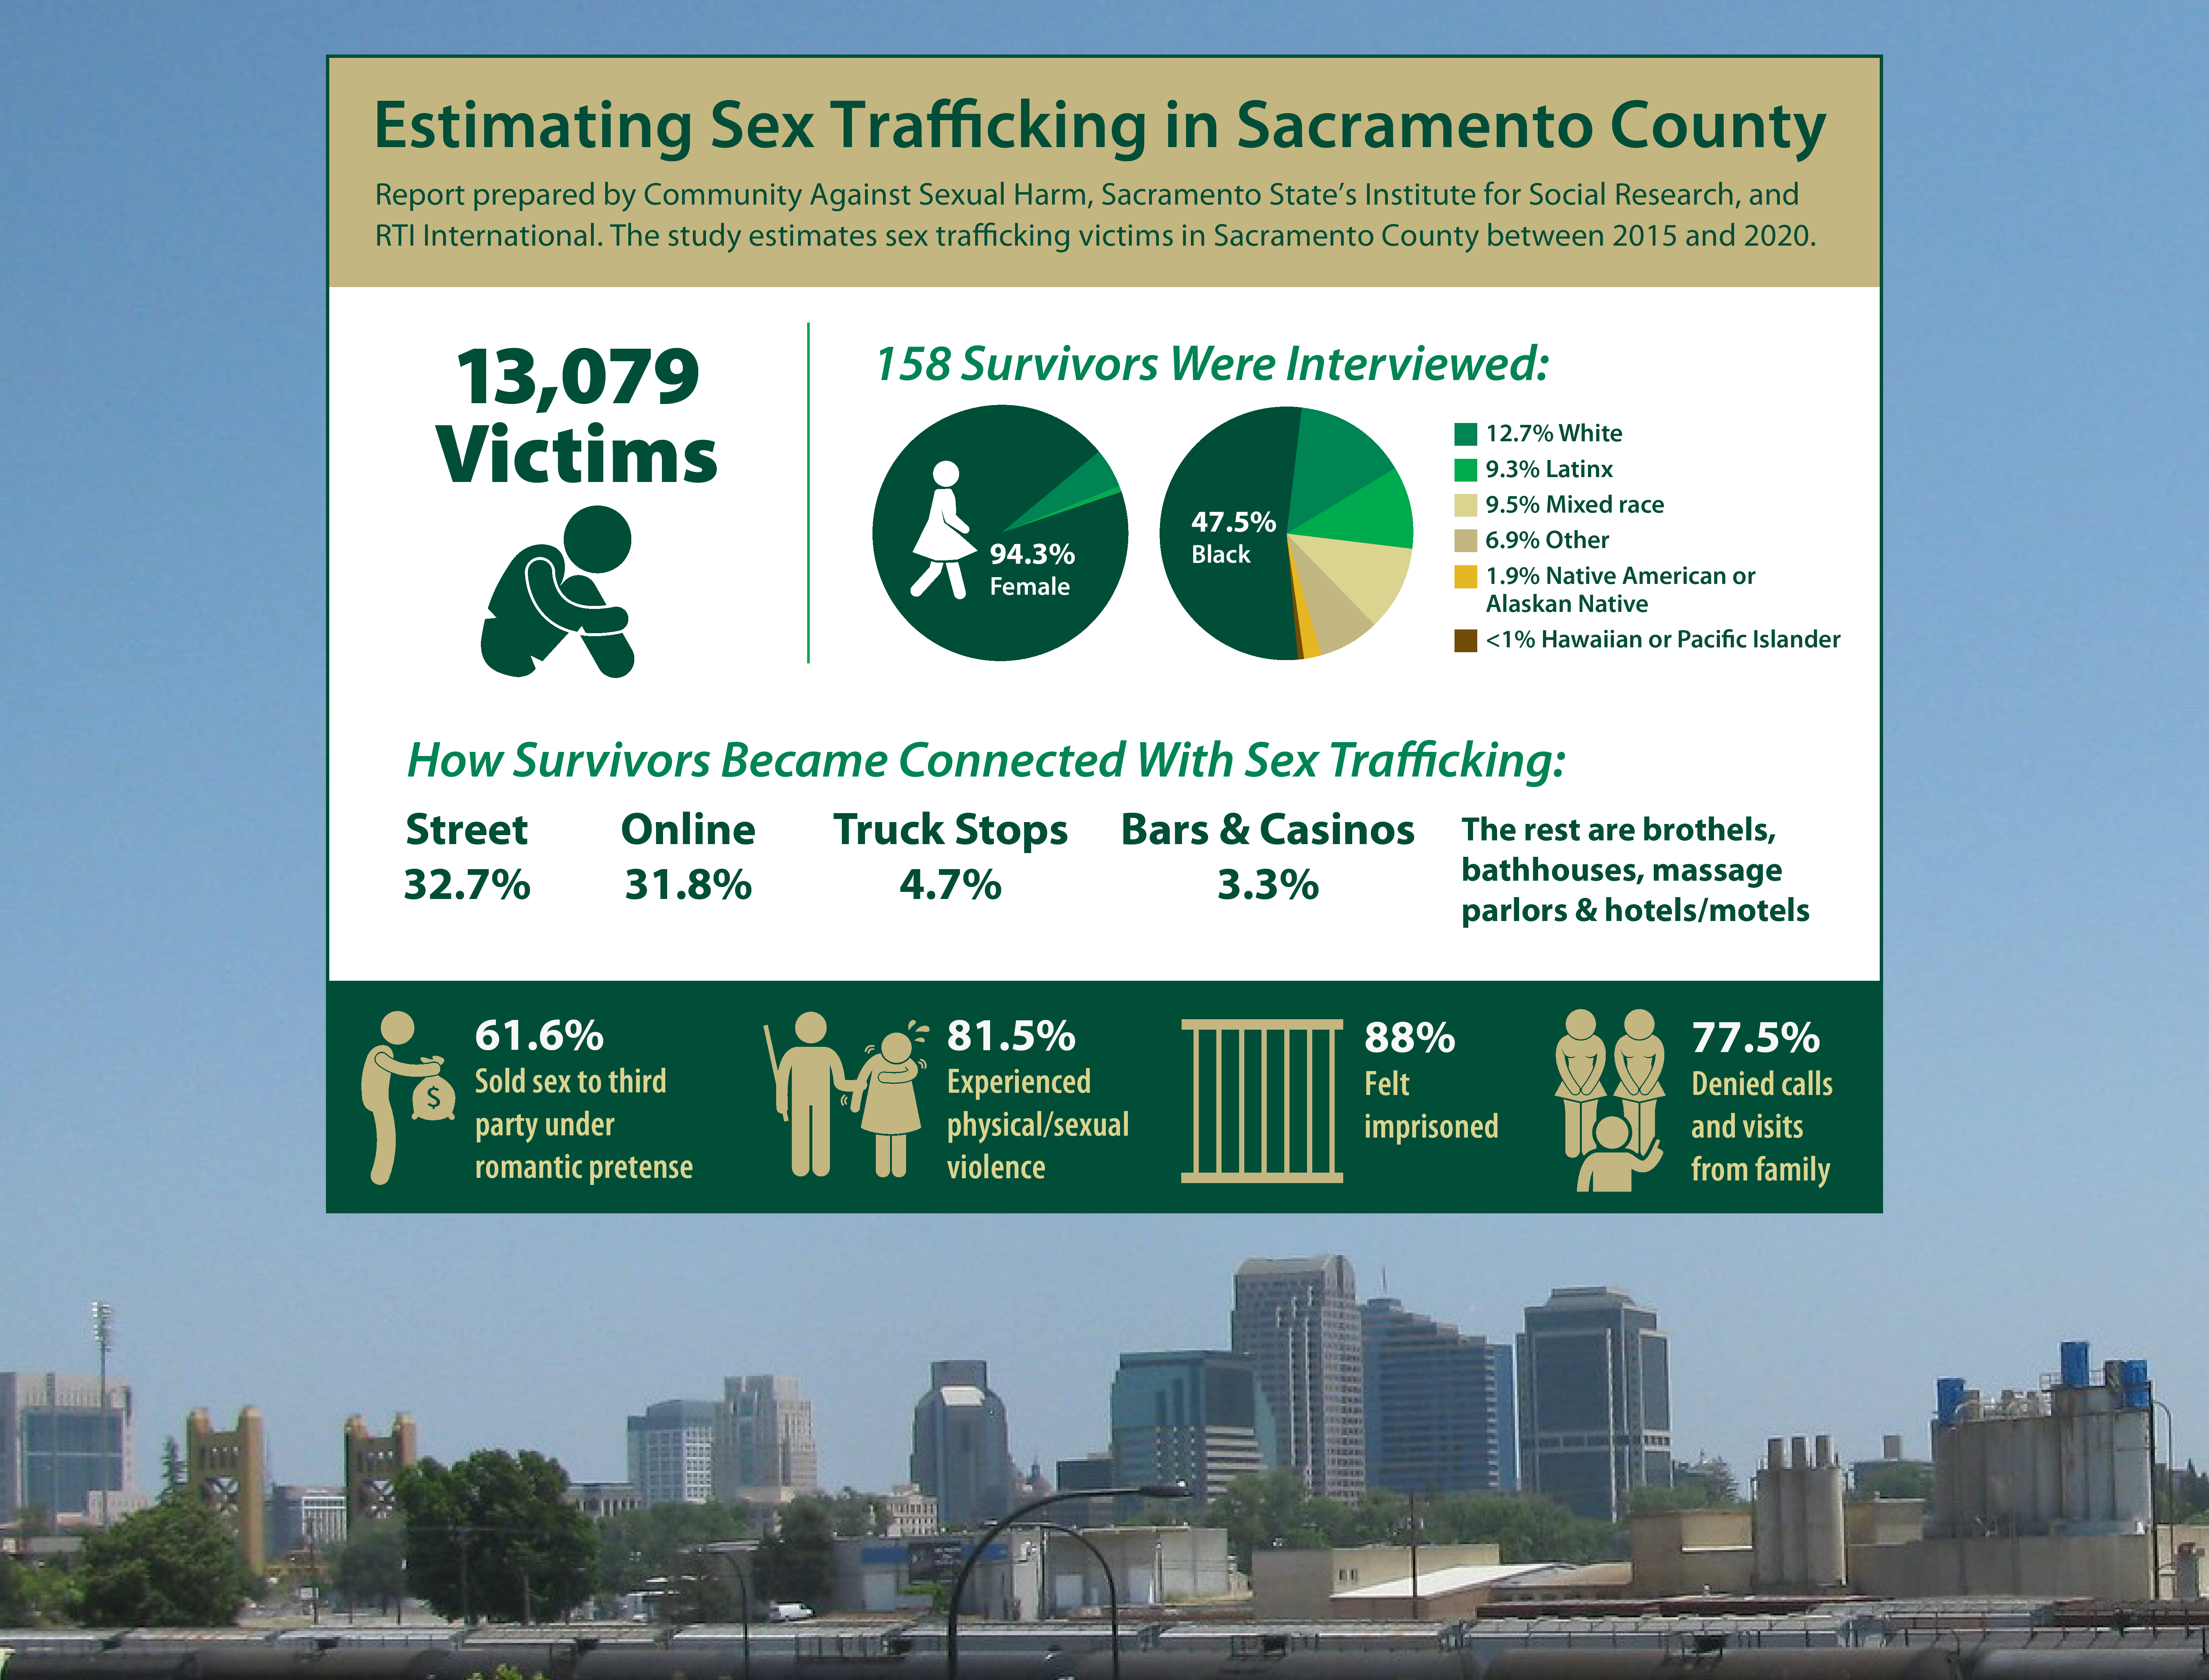 Sac States Institute For Social Research Helps Document Alarming Level Of Sex Trafficking In 7351